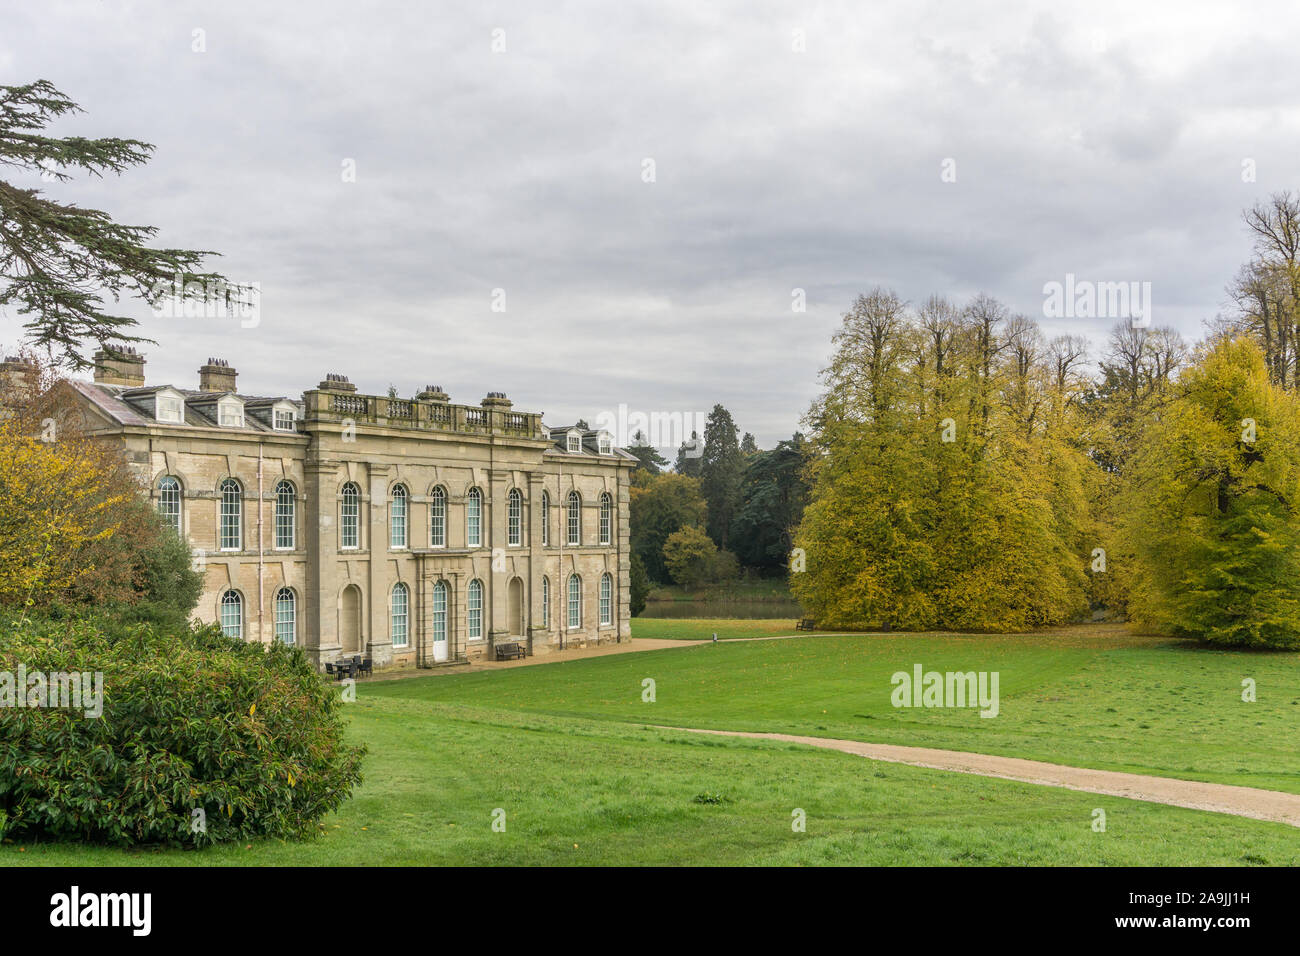 Compton Verney, an 18th century country house which now houses an award winning art gallery; Warwickshire, UK Stock Photo